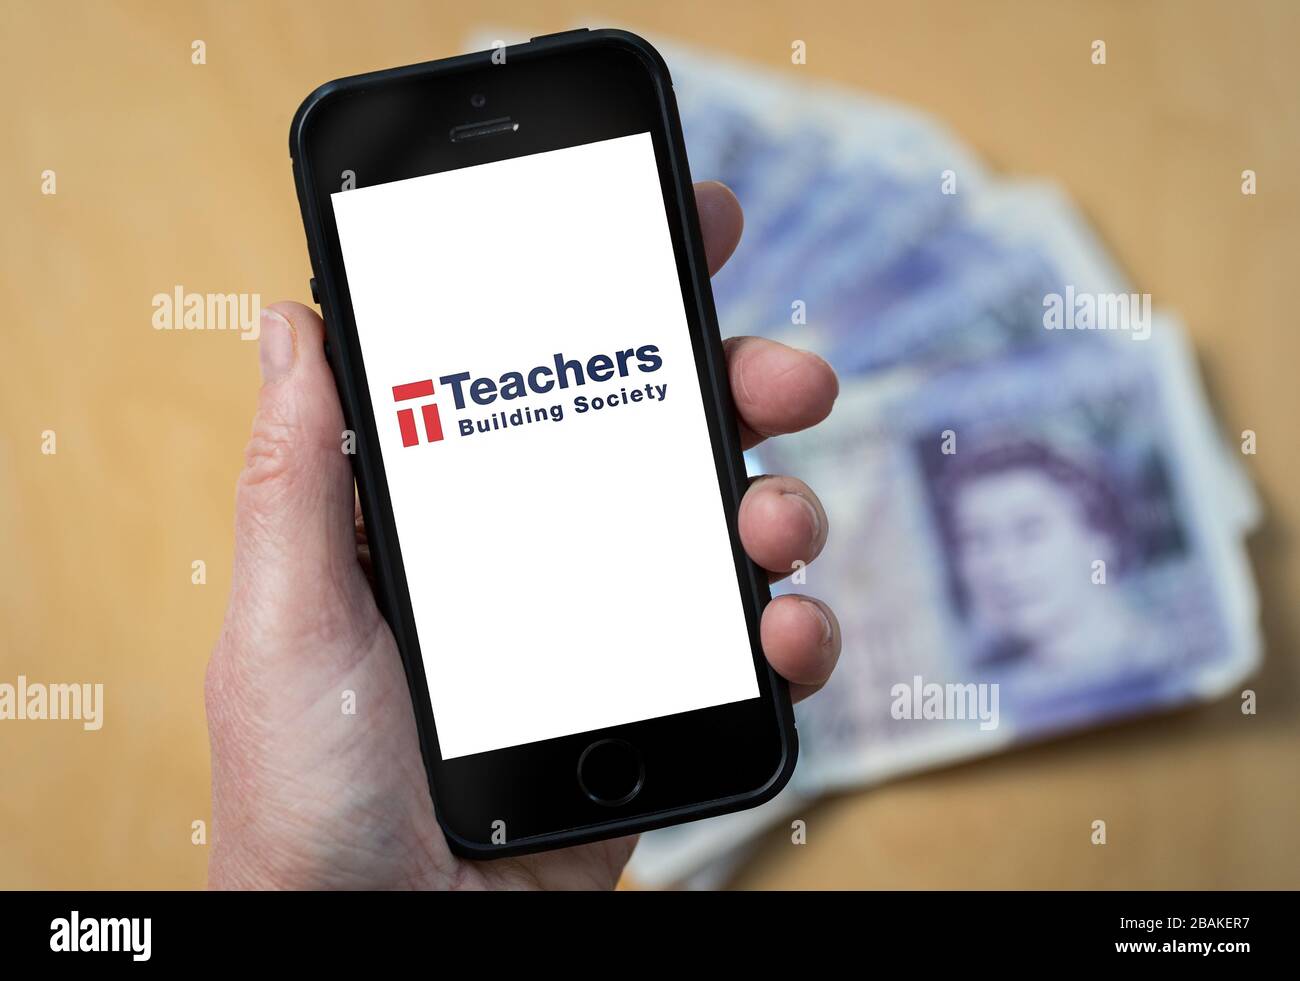 A woman holding a mobile phone showing Teachers Building Society (editorial use only) Stock Photo